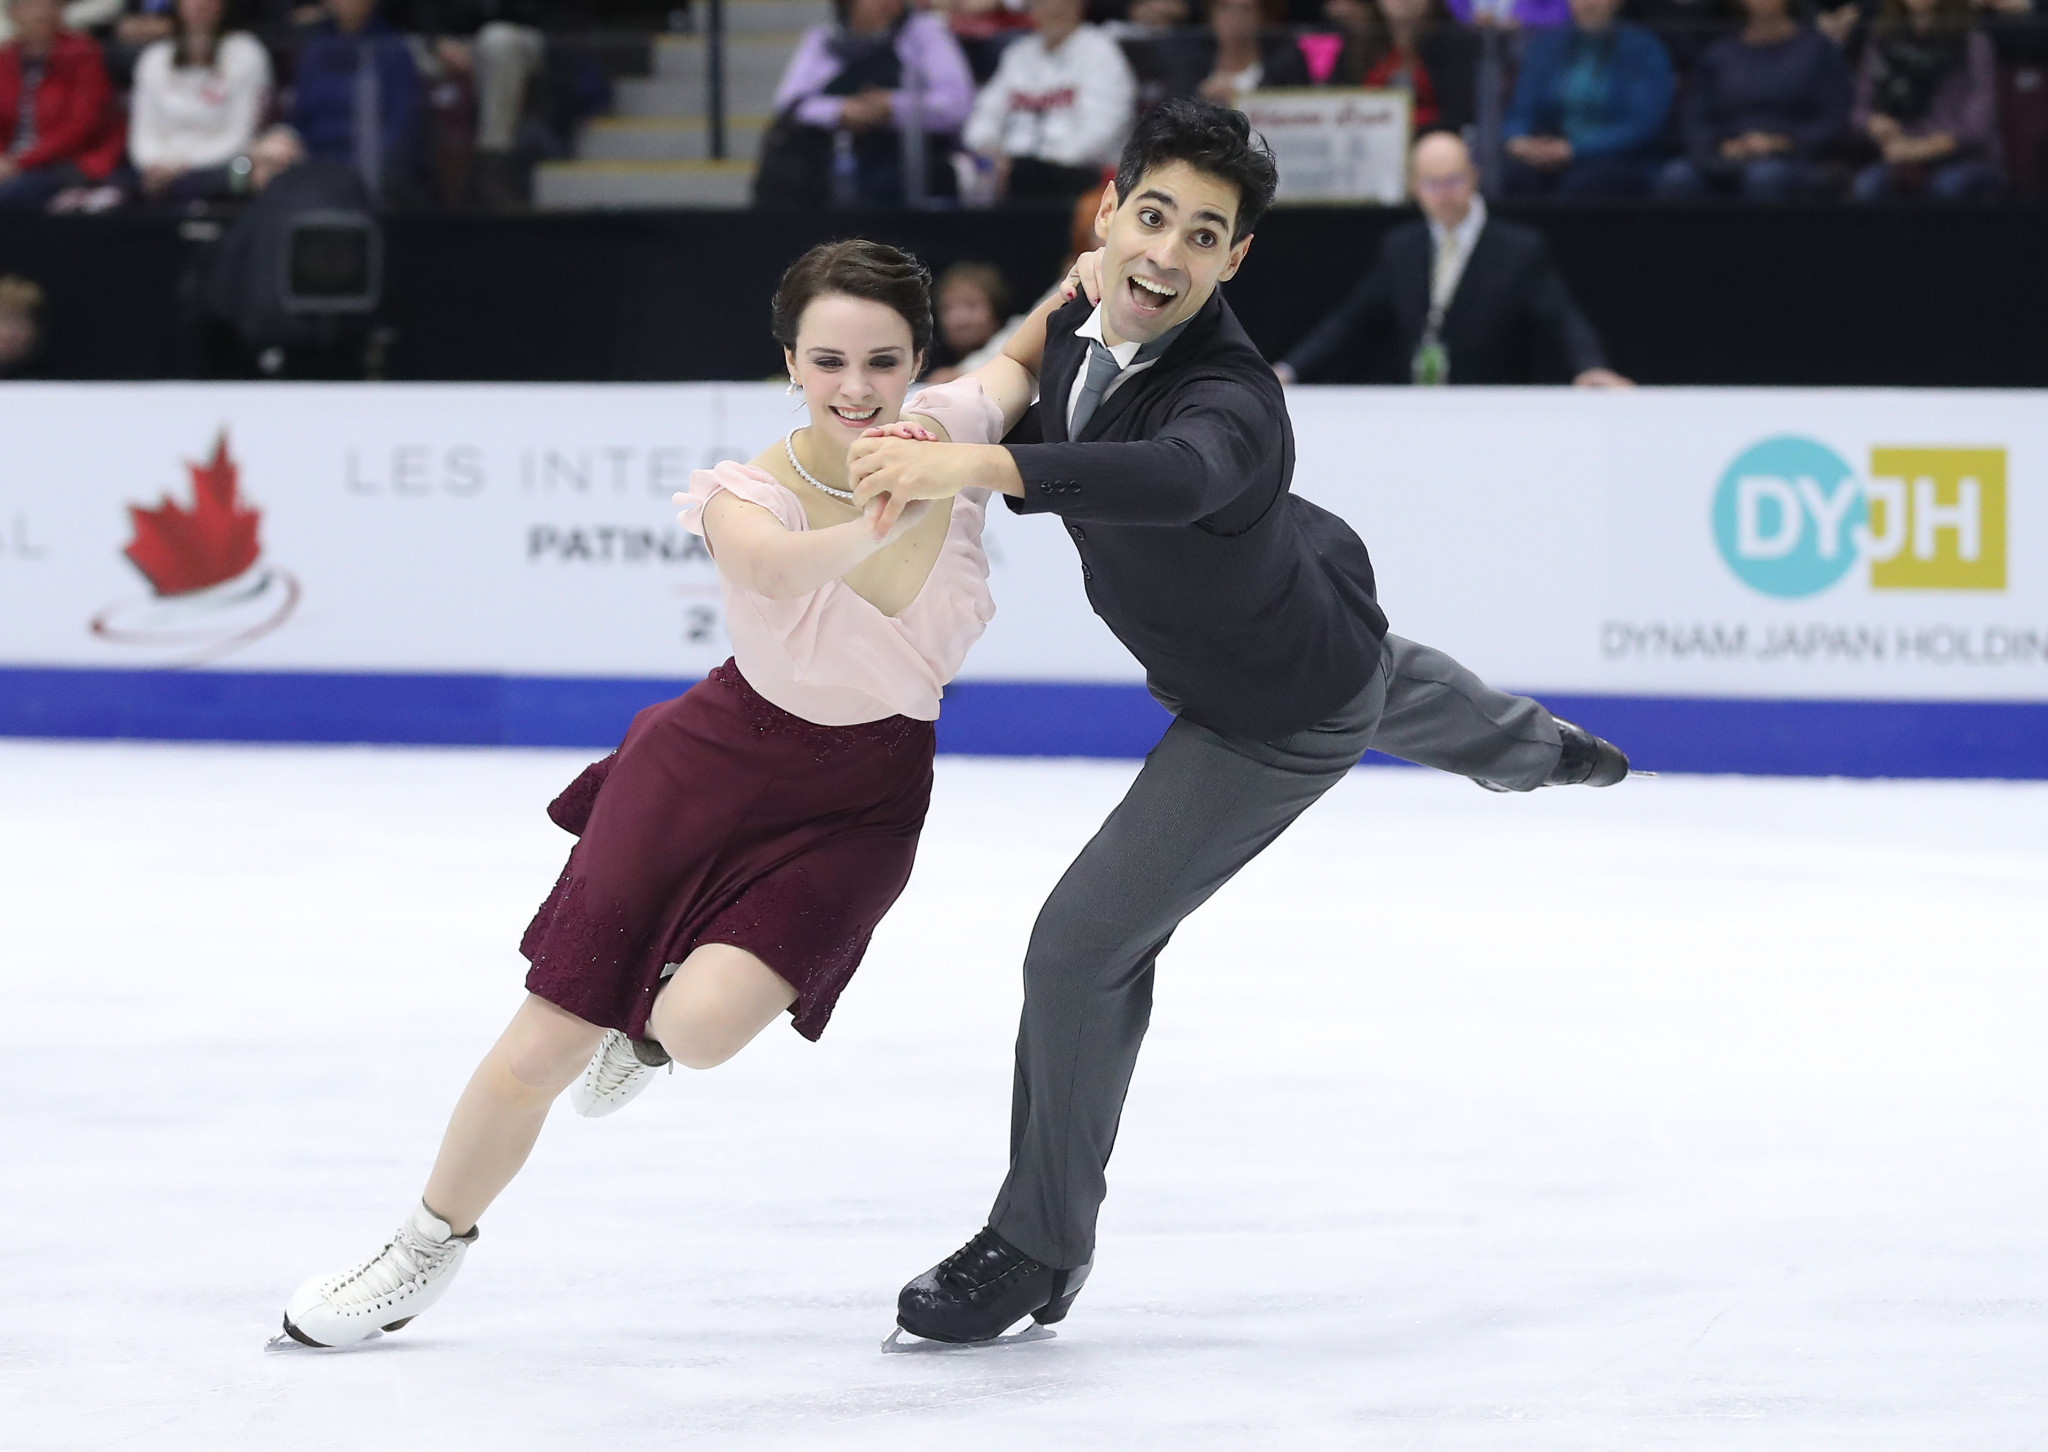 Mississauga last hosted the Skate Canada International in 2016 ©Getty Images